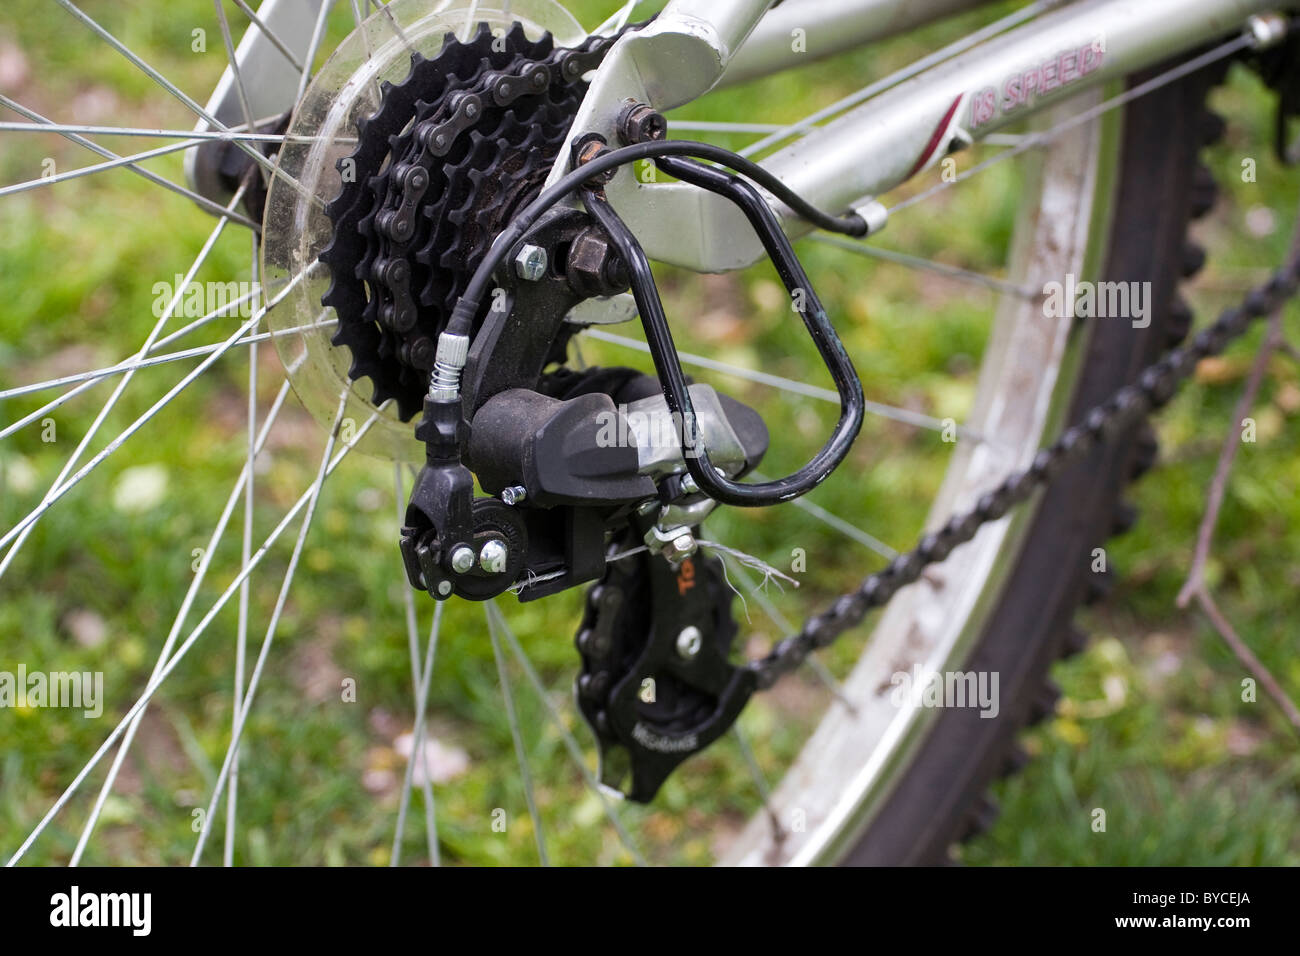 Rear Derailleur and chain on an 18 speed bicycle with metal guard and sprocket. Stock Photo